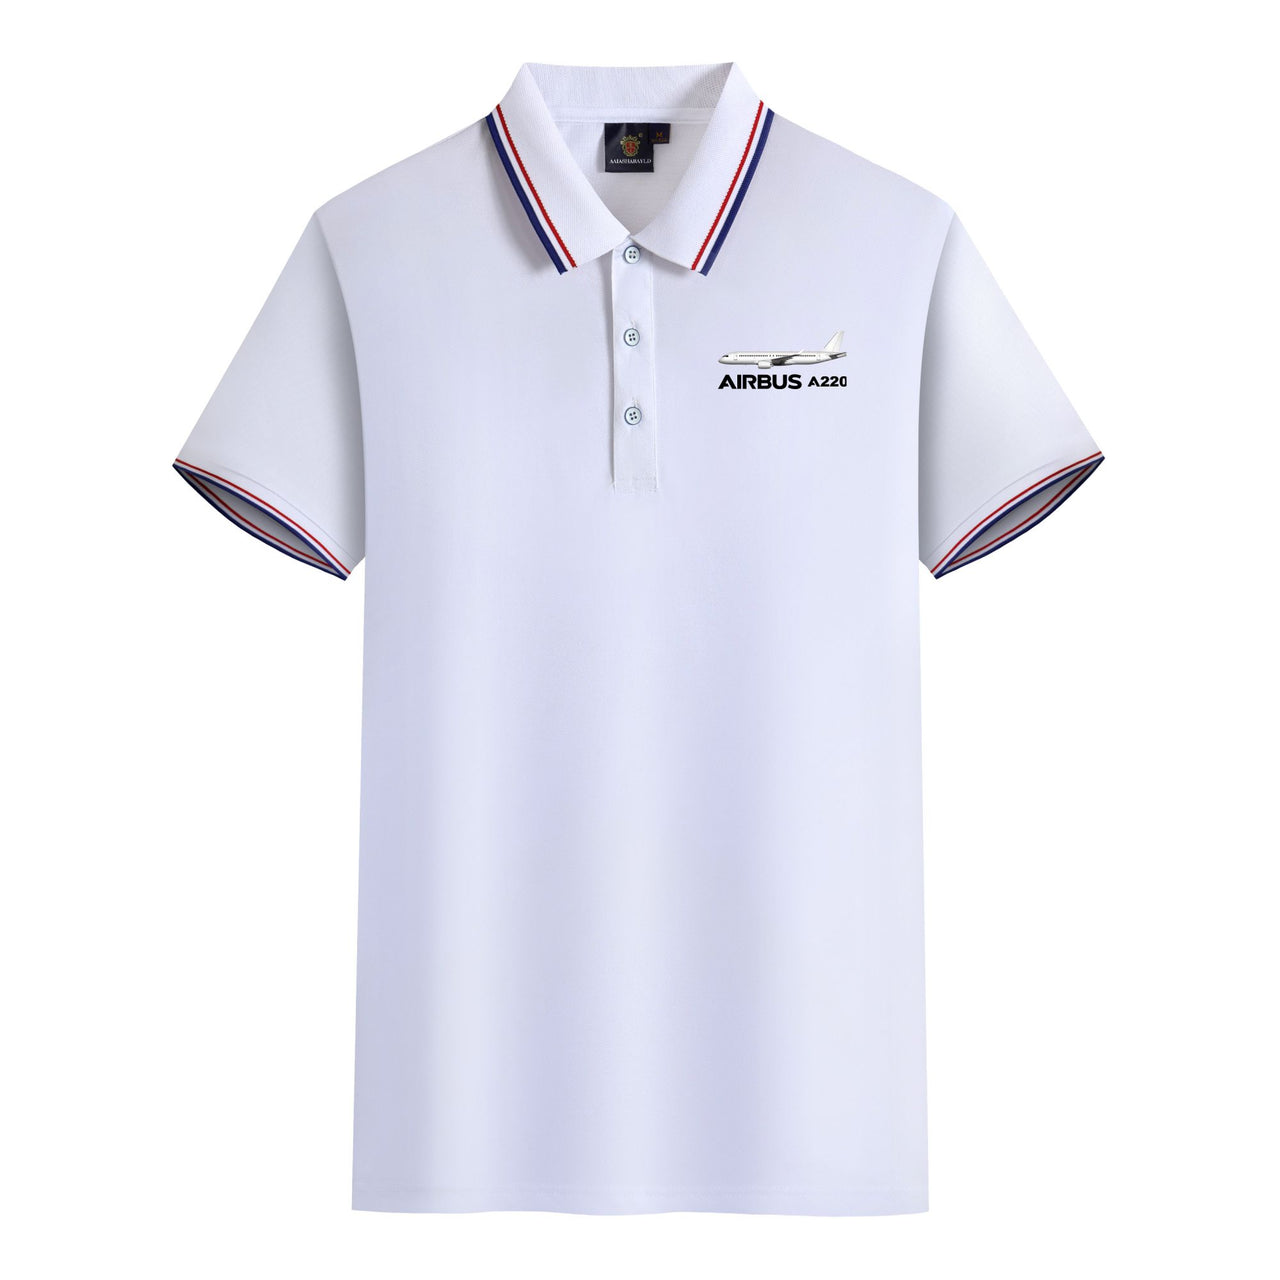 The Airbus A220 Designed Stylish Polo T-Shirts